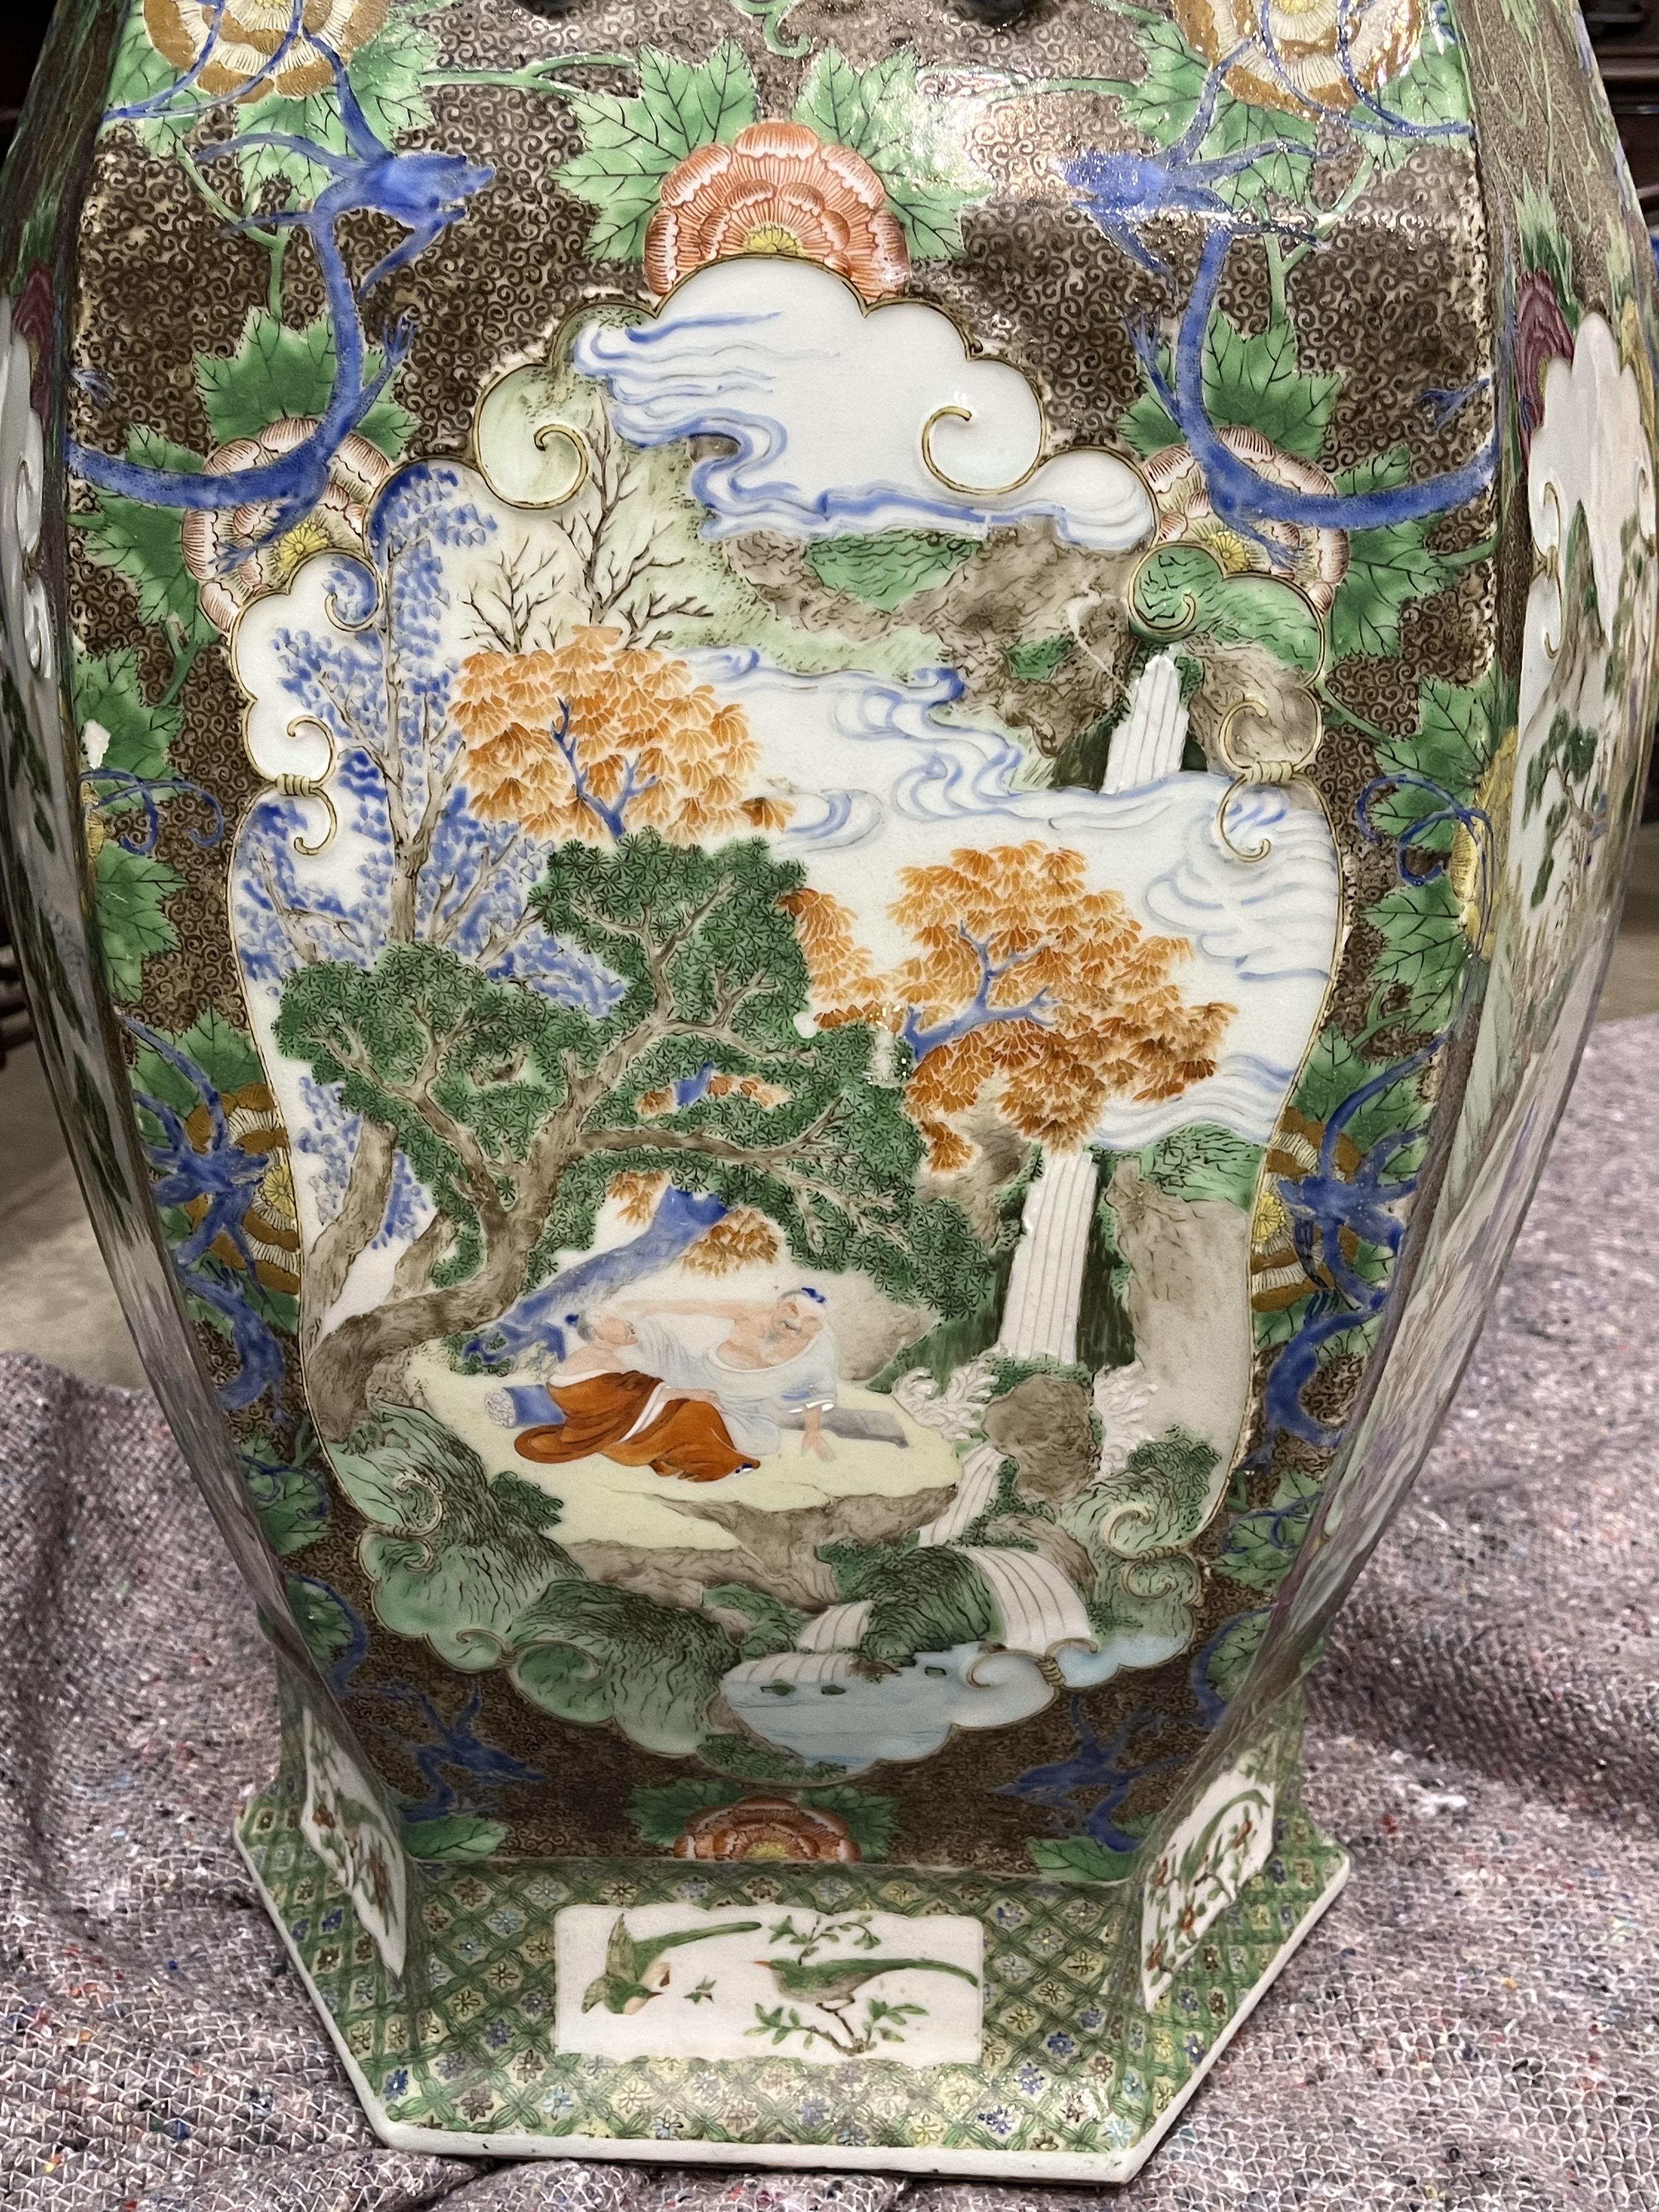 A LARGE CHINESE ‘FAMILLE-ROSE’ PORCELAIN HEXAGONAL VASE, QING DYNASTY, 19TH CENTURY - Image 4 of 9